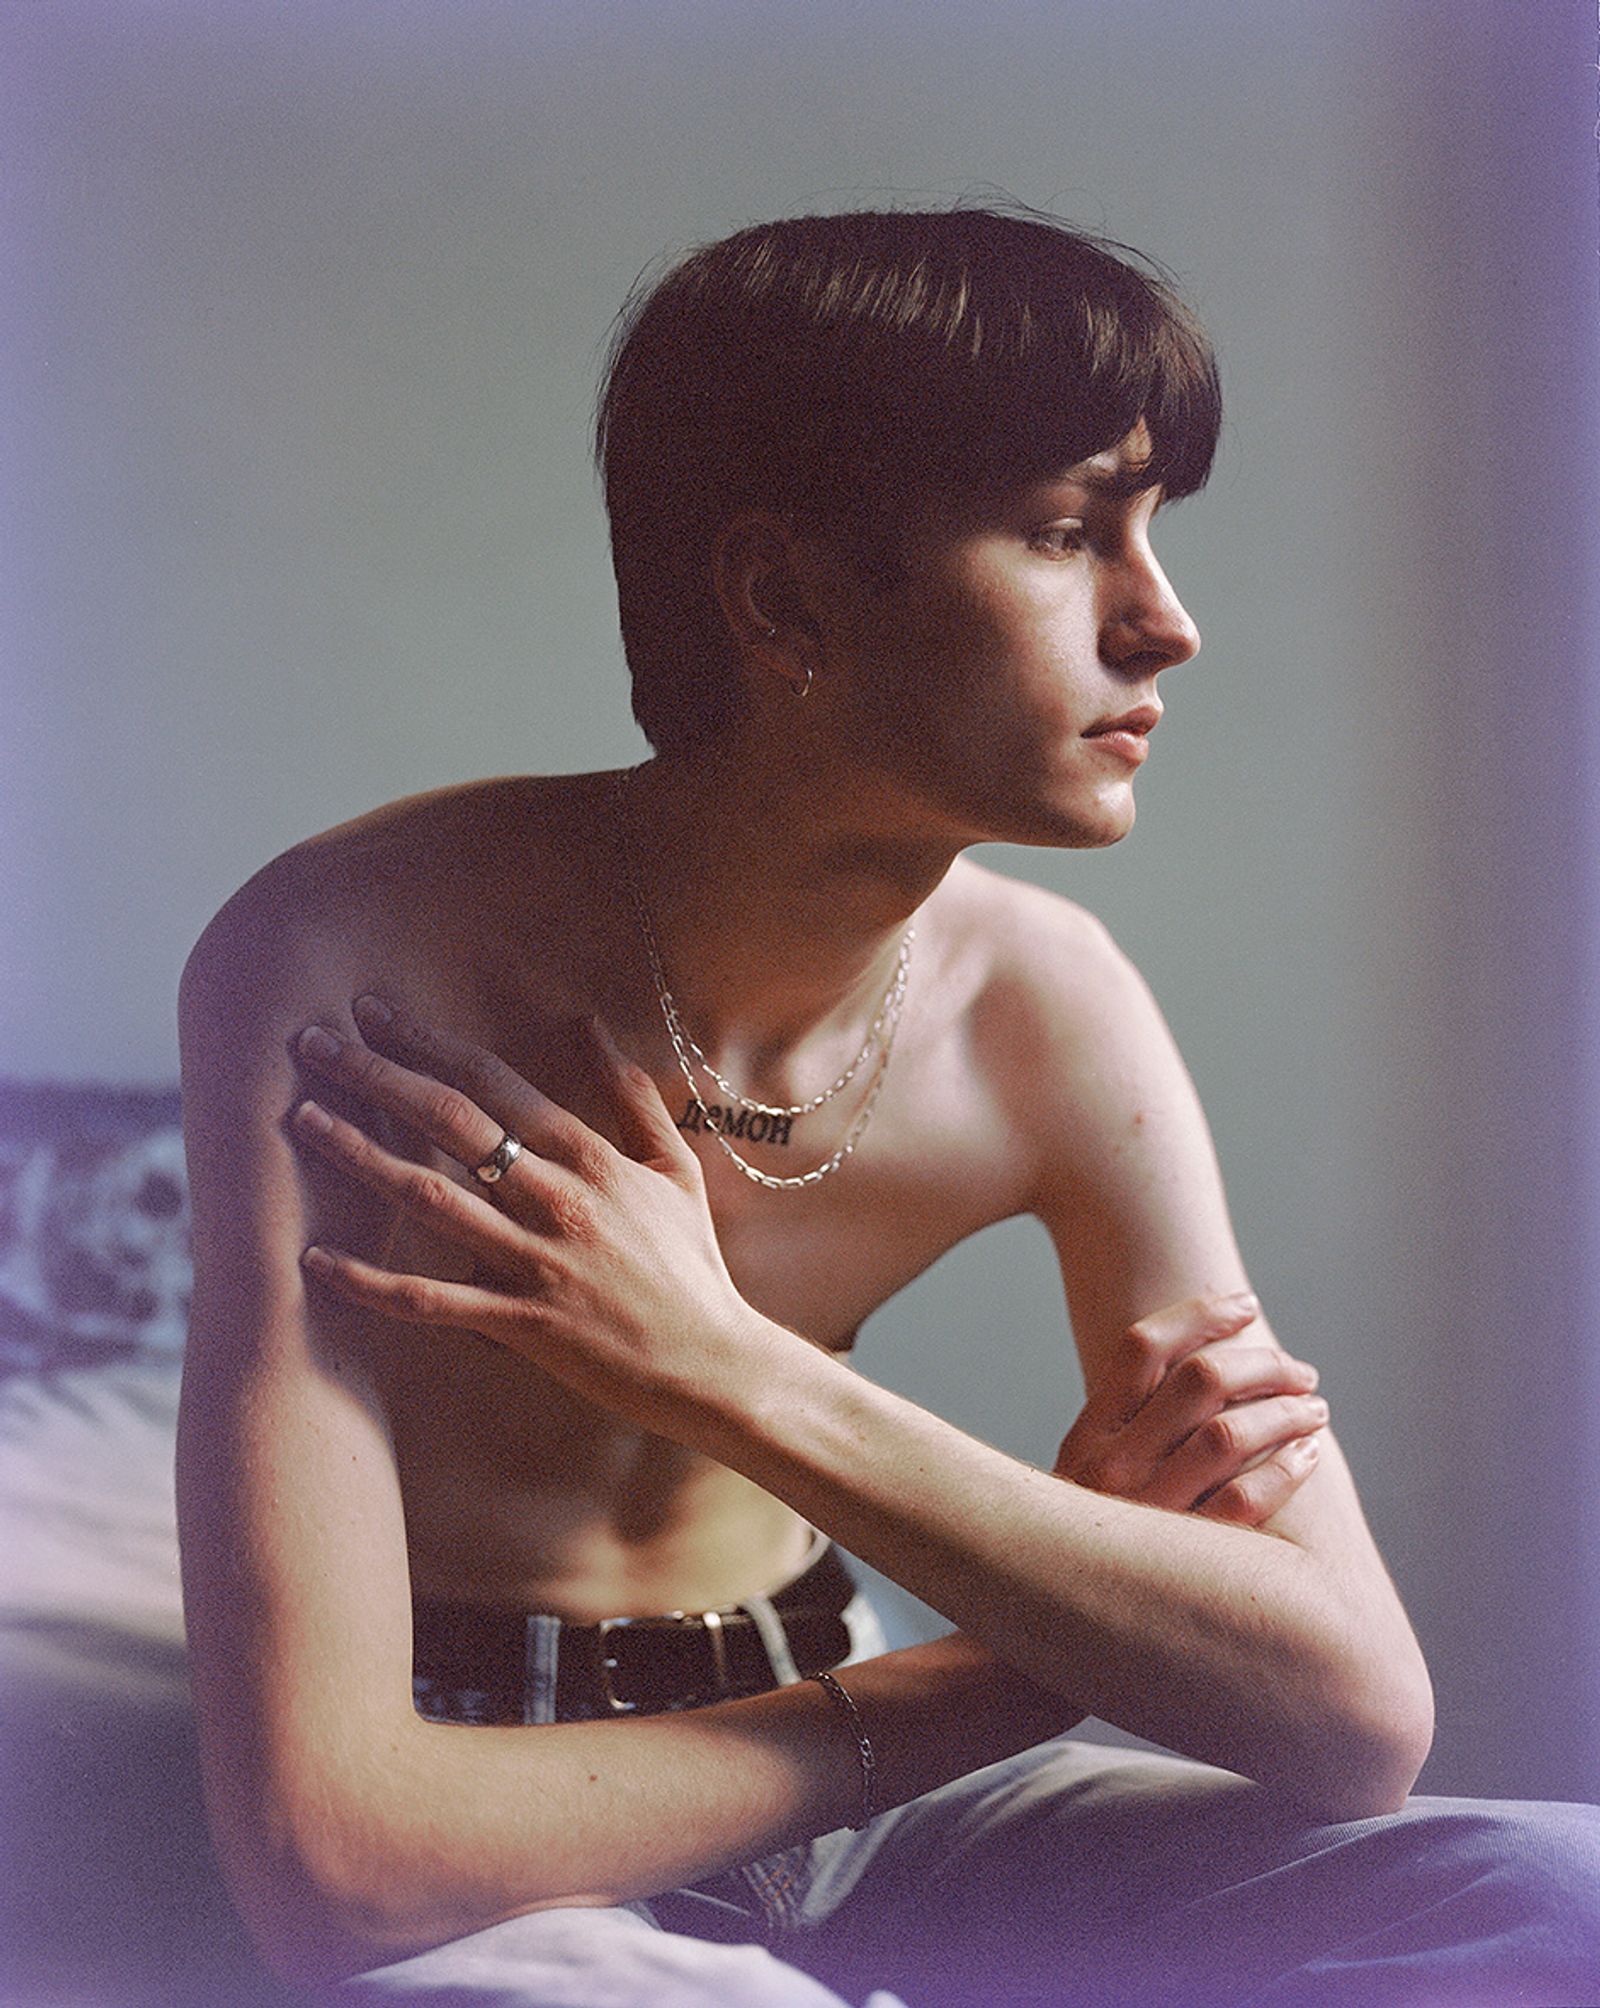 © Chiara Kurtovic - Image from the In My Bed photography project